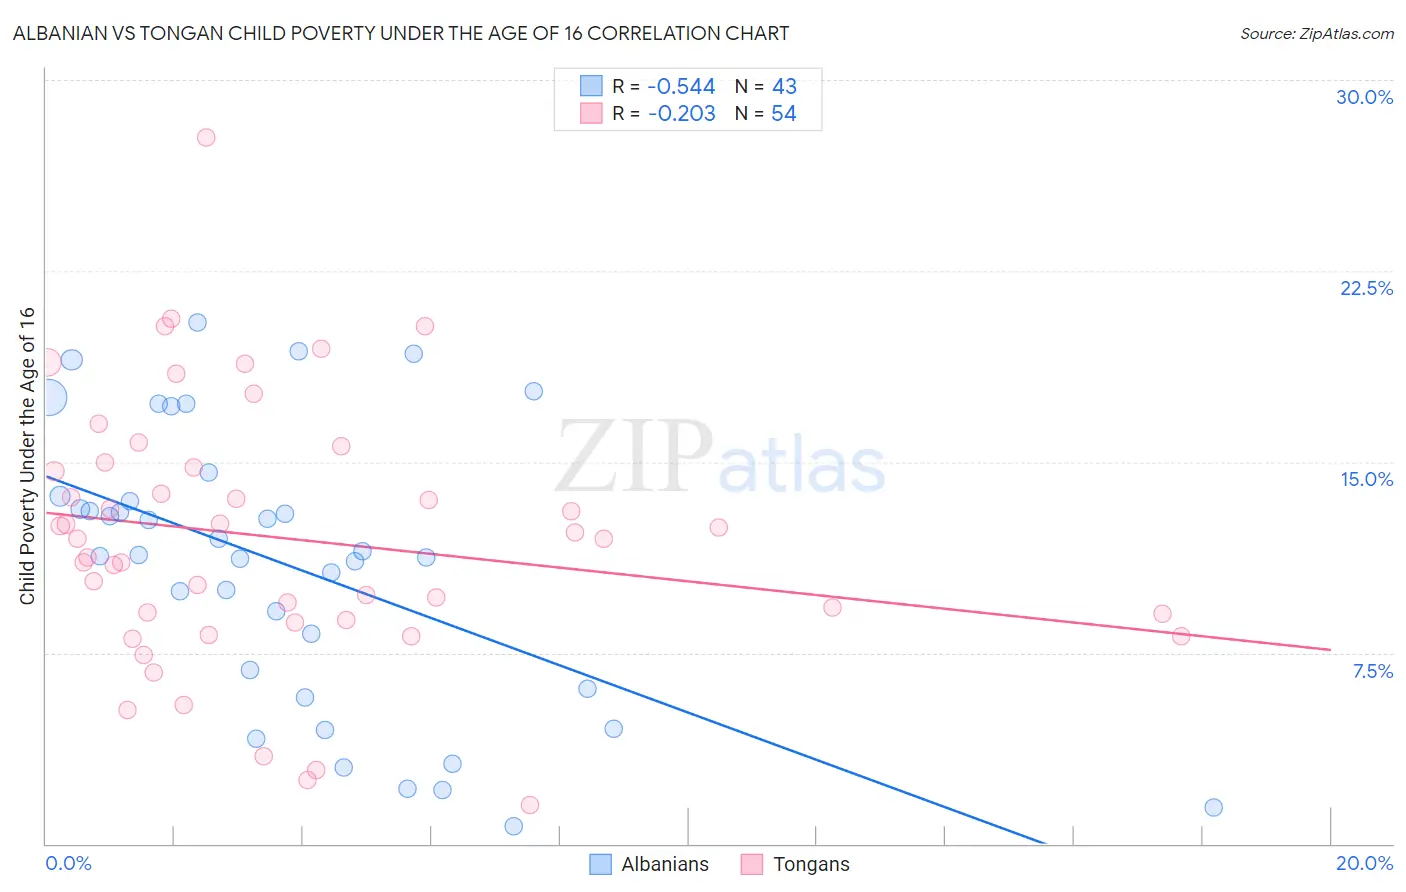 Albanian vs Tongan Child Poverty Under the Age of 16